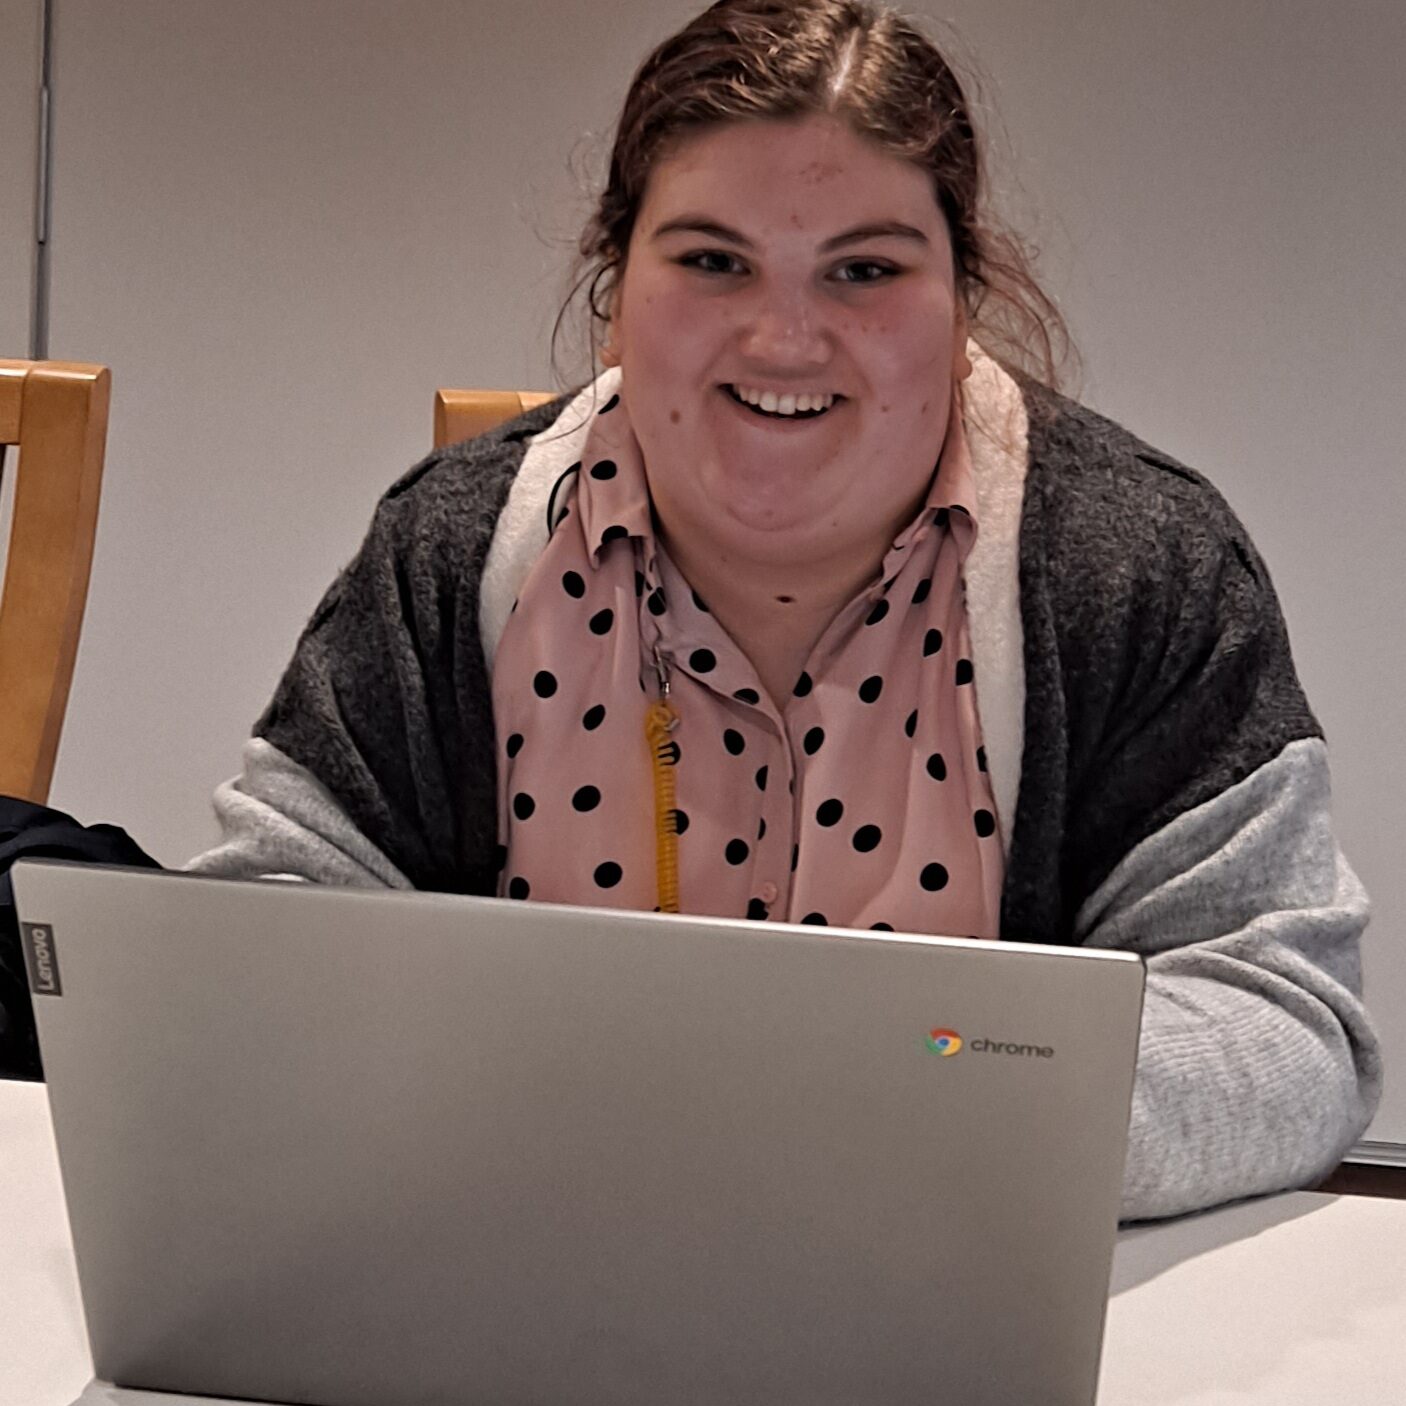 A photograph of Erin O'Donnell, Clywd Alyn's Community Assistant and DFN Search Intern. She smiles as she sits at a desk with a Chromebook in front of her.